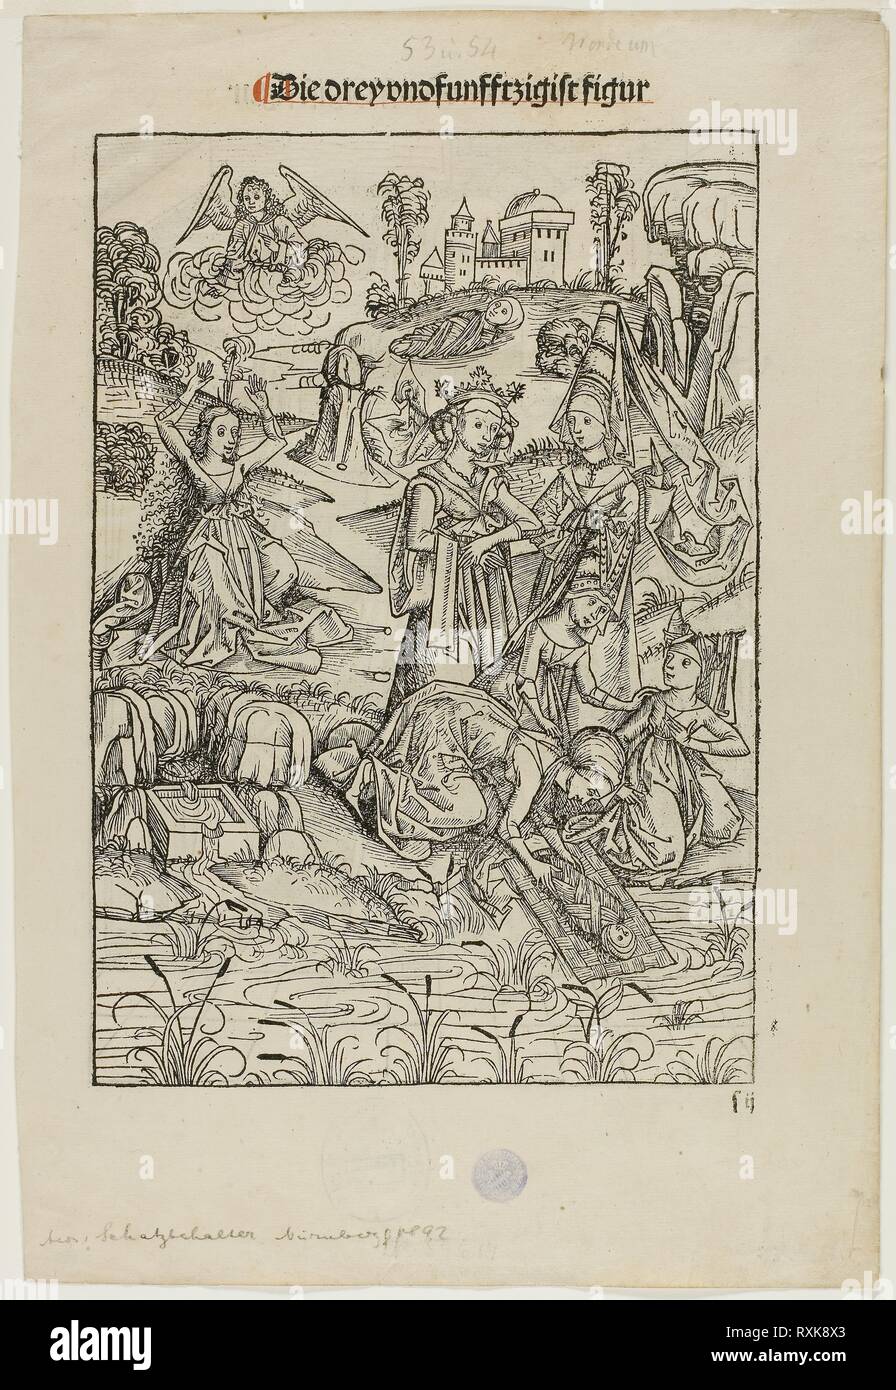 Moses Found by Pharaoh's Daughter (recto) and Judas's Betrayal (verso), pages 53 and 54, from the Treasury (Schatzbehalter). Michael Wolgemut and Workshop (German, 1434/37-1519); published by Anton Koberger (German, 1440-1513). Date: 1491-1492. Dimensions: 250 x 175 mm (image/block, recto); 250 x 177 (image/block, verso); 335 x 230 mm (sheet). Woodcut on cream laid paper. Origin: Germany. Museum: The Chicago Art Institute. Stock Photo